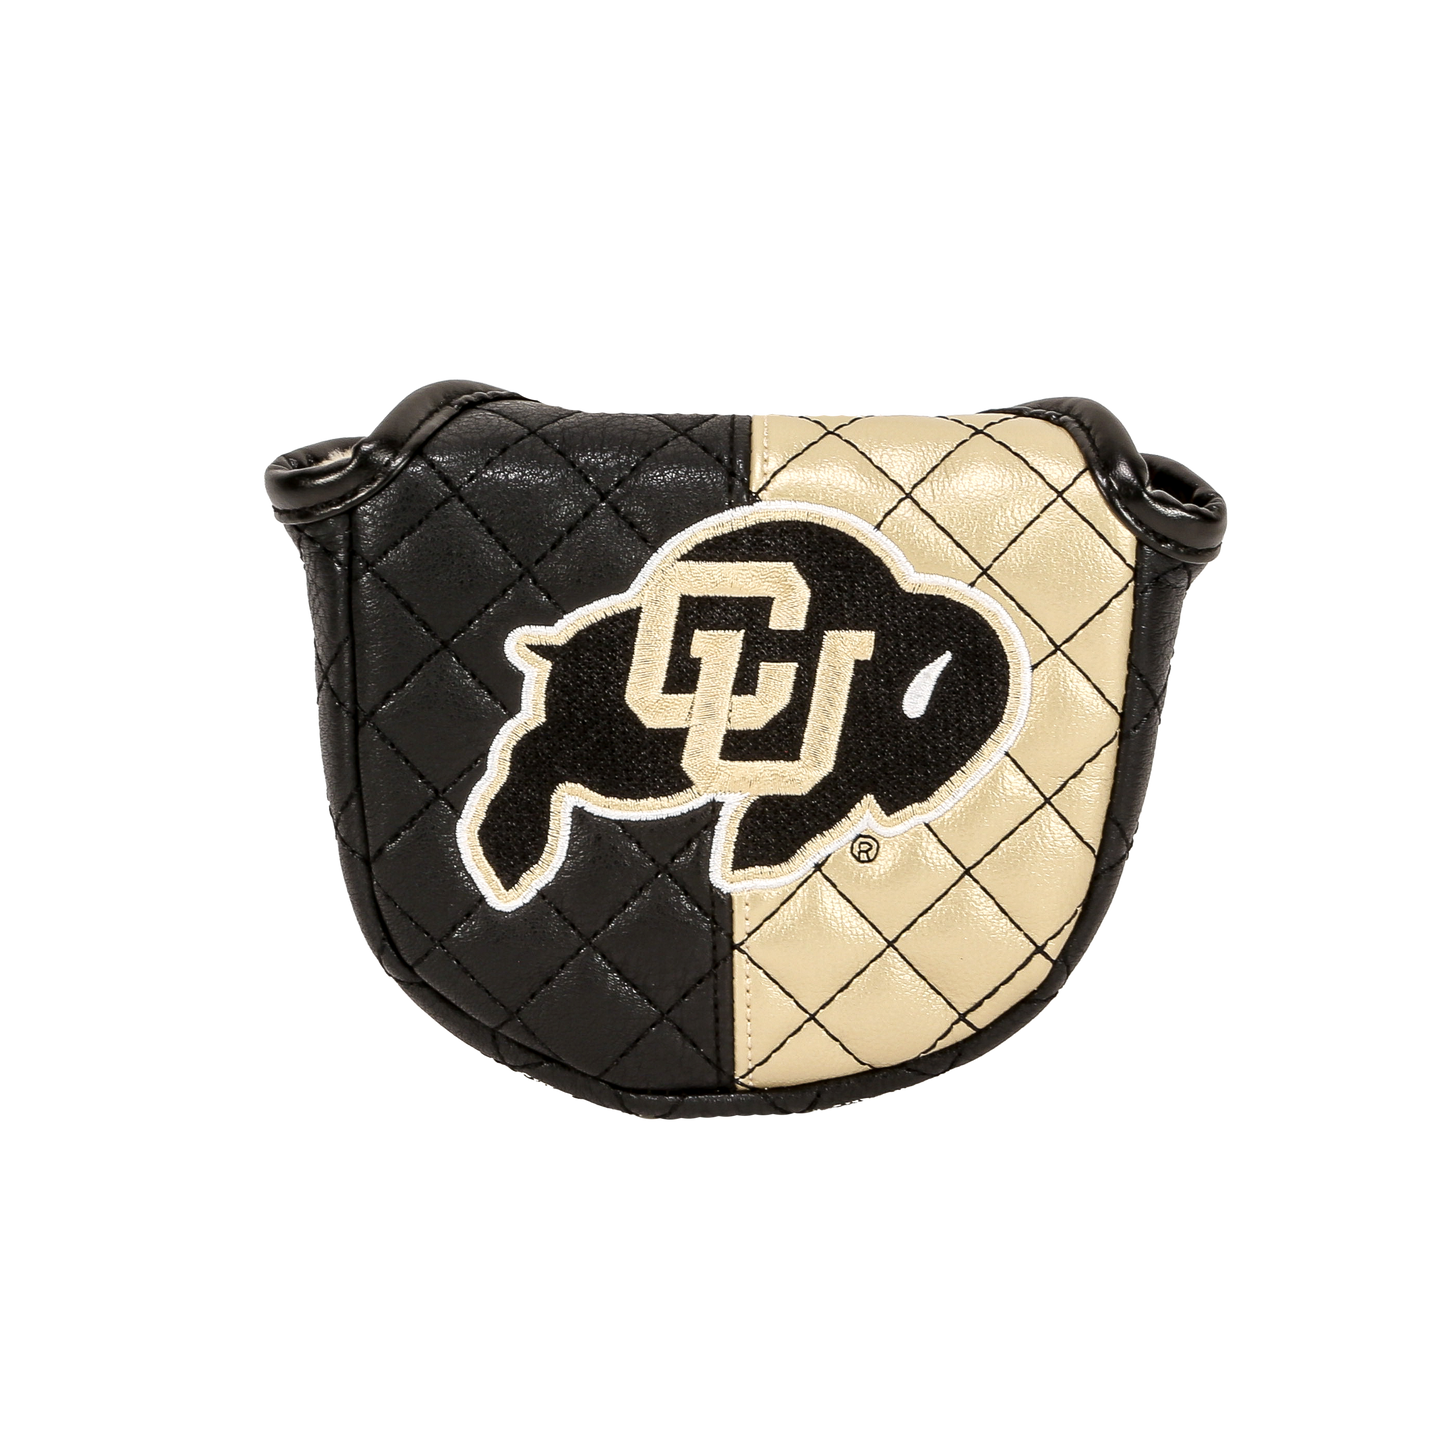 Colorado "Buffaloes" Mallet Putter Cover